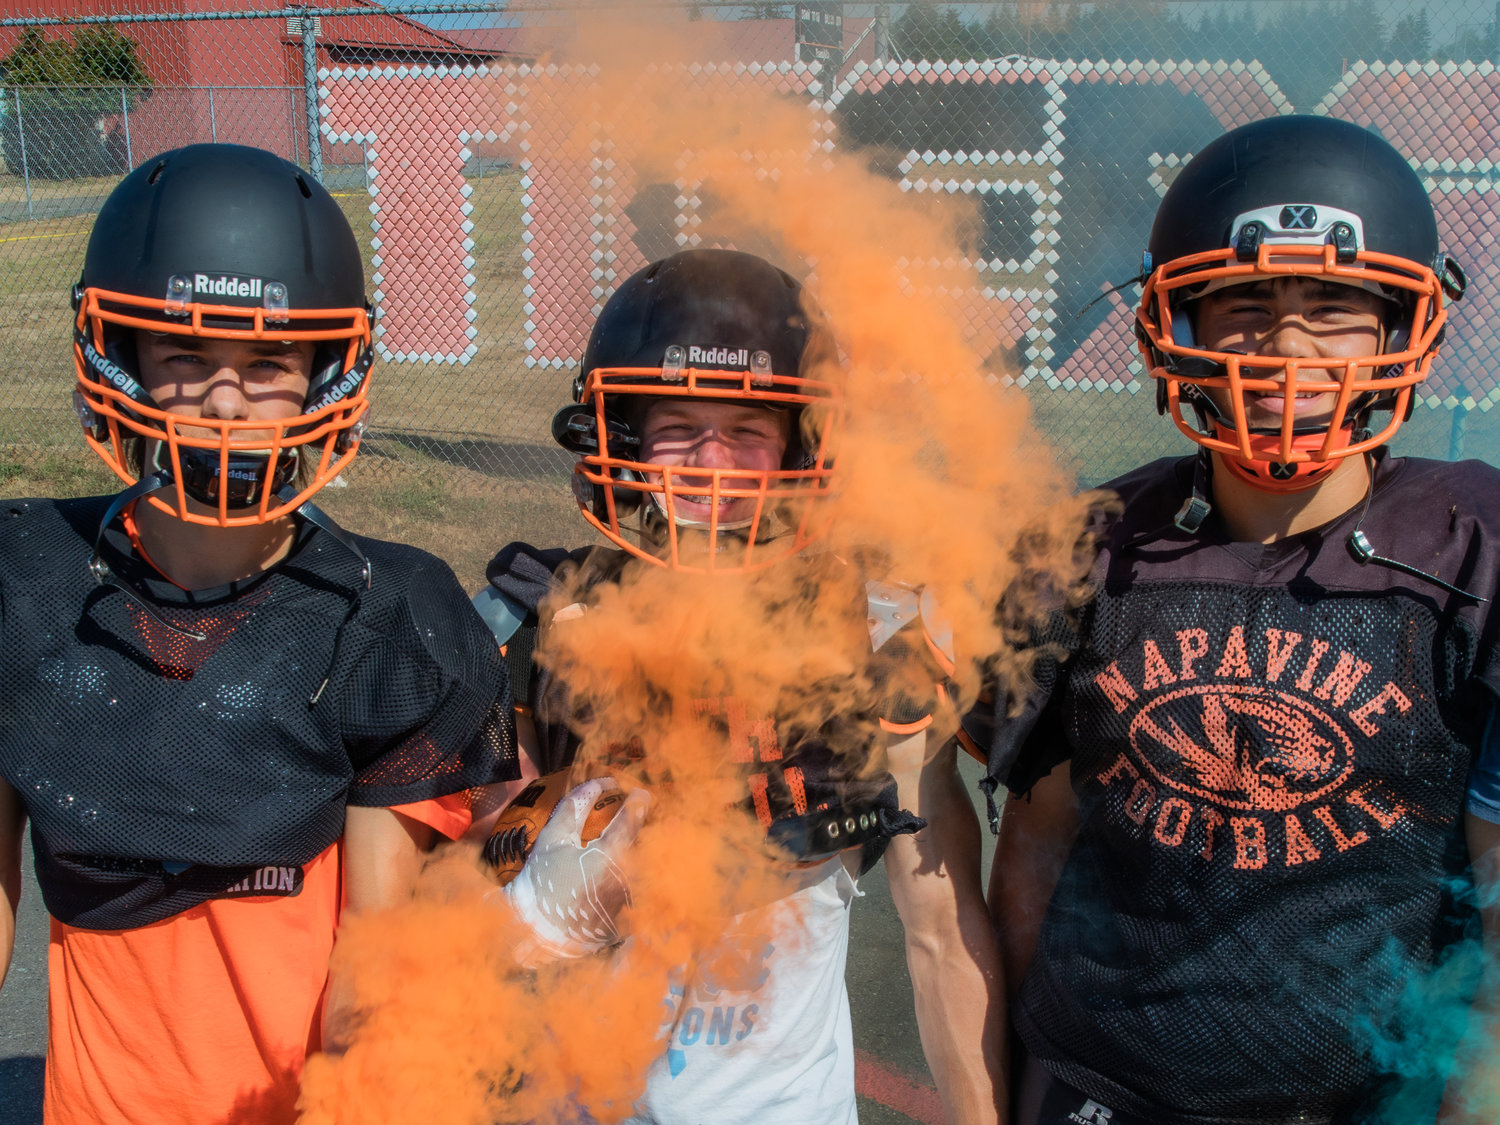 Ashton Demarest, Cael Stanley and Deacon Parker pose for a photo in their practice gear Tuesday afternoon in Napavine.